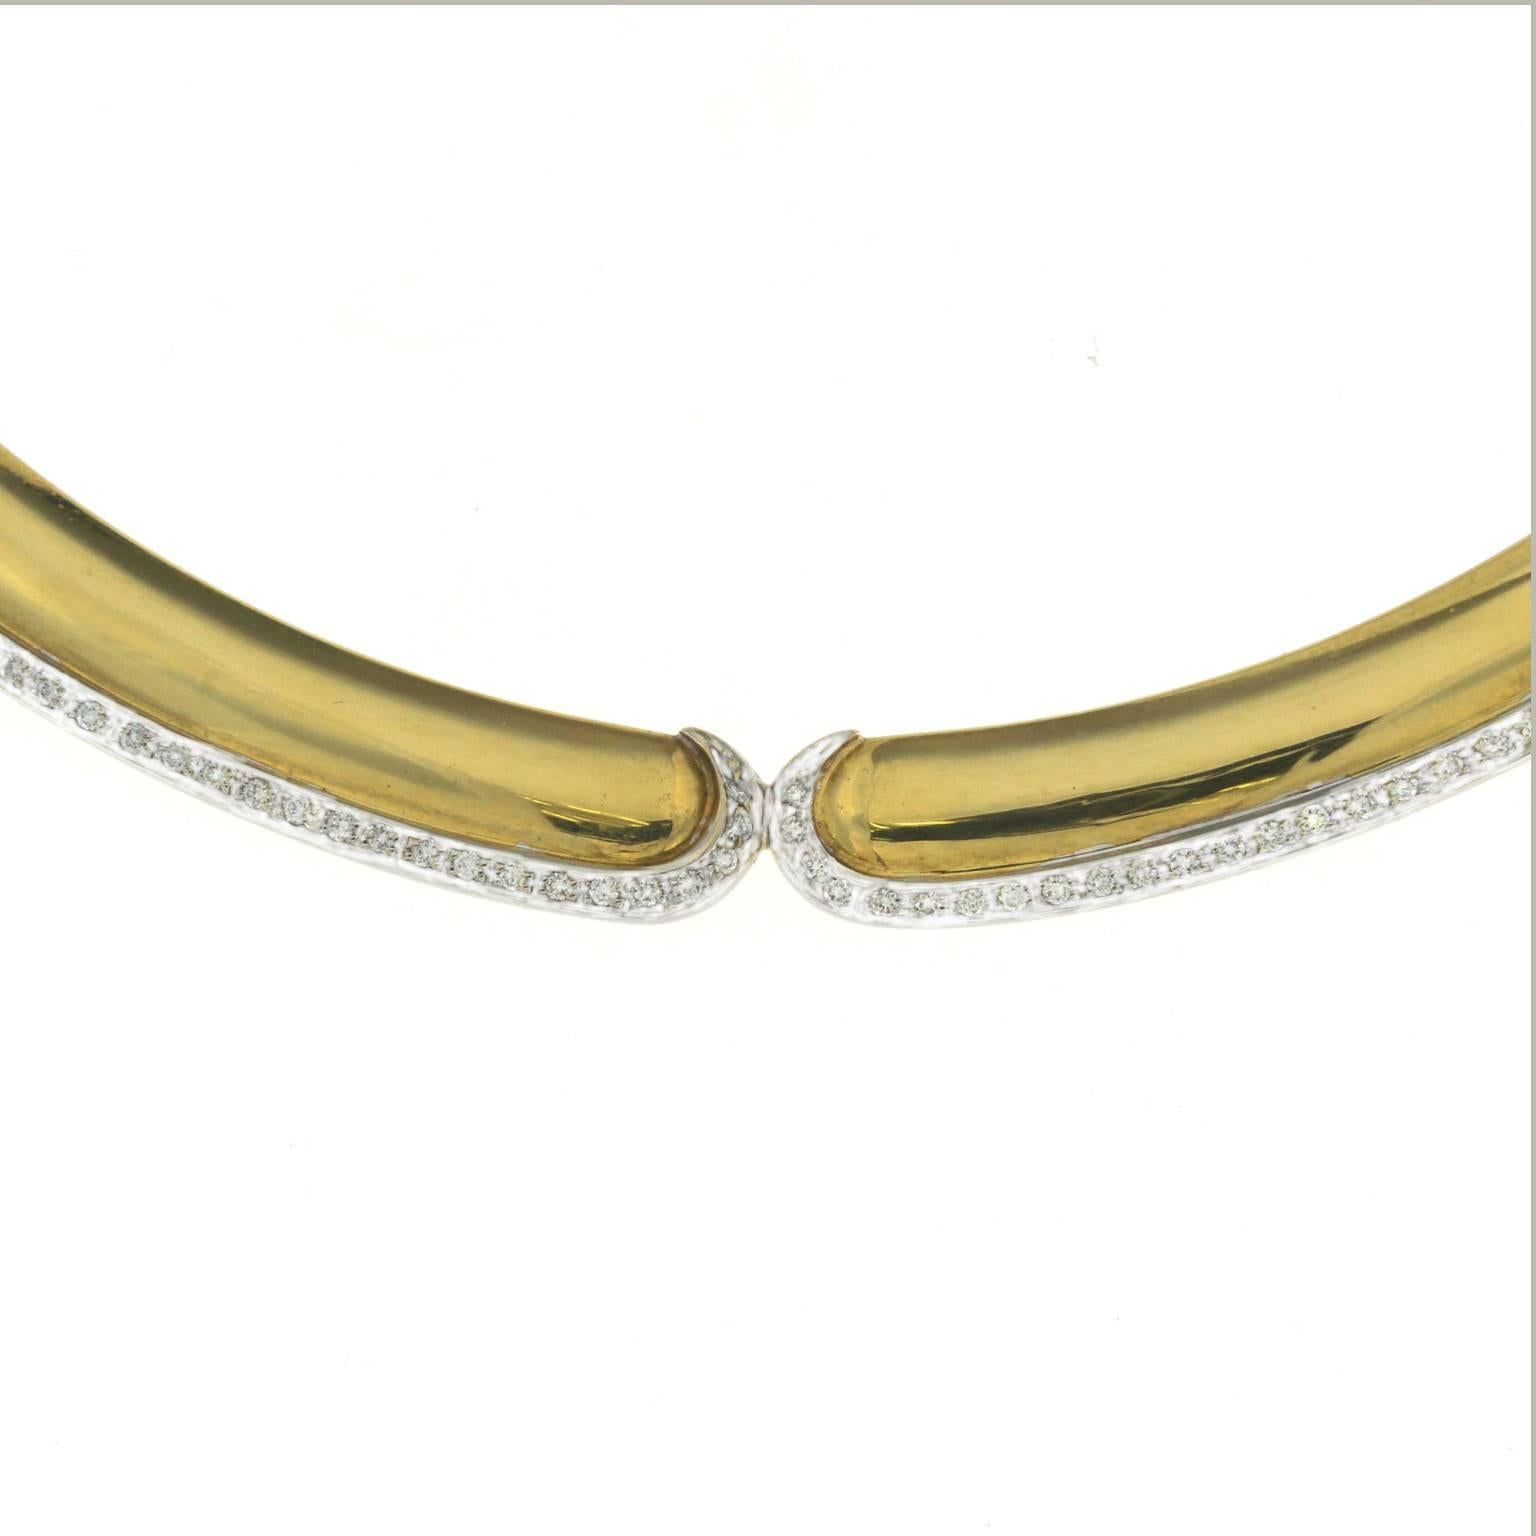 Round shape collar but made with half-length barrel to fit perfectly to the woman's neck anatomy.
This collier is part of the comma collection
Made entirely of yellow gold the two long commas that run it on both sides are white gold studded with 78